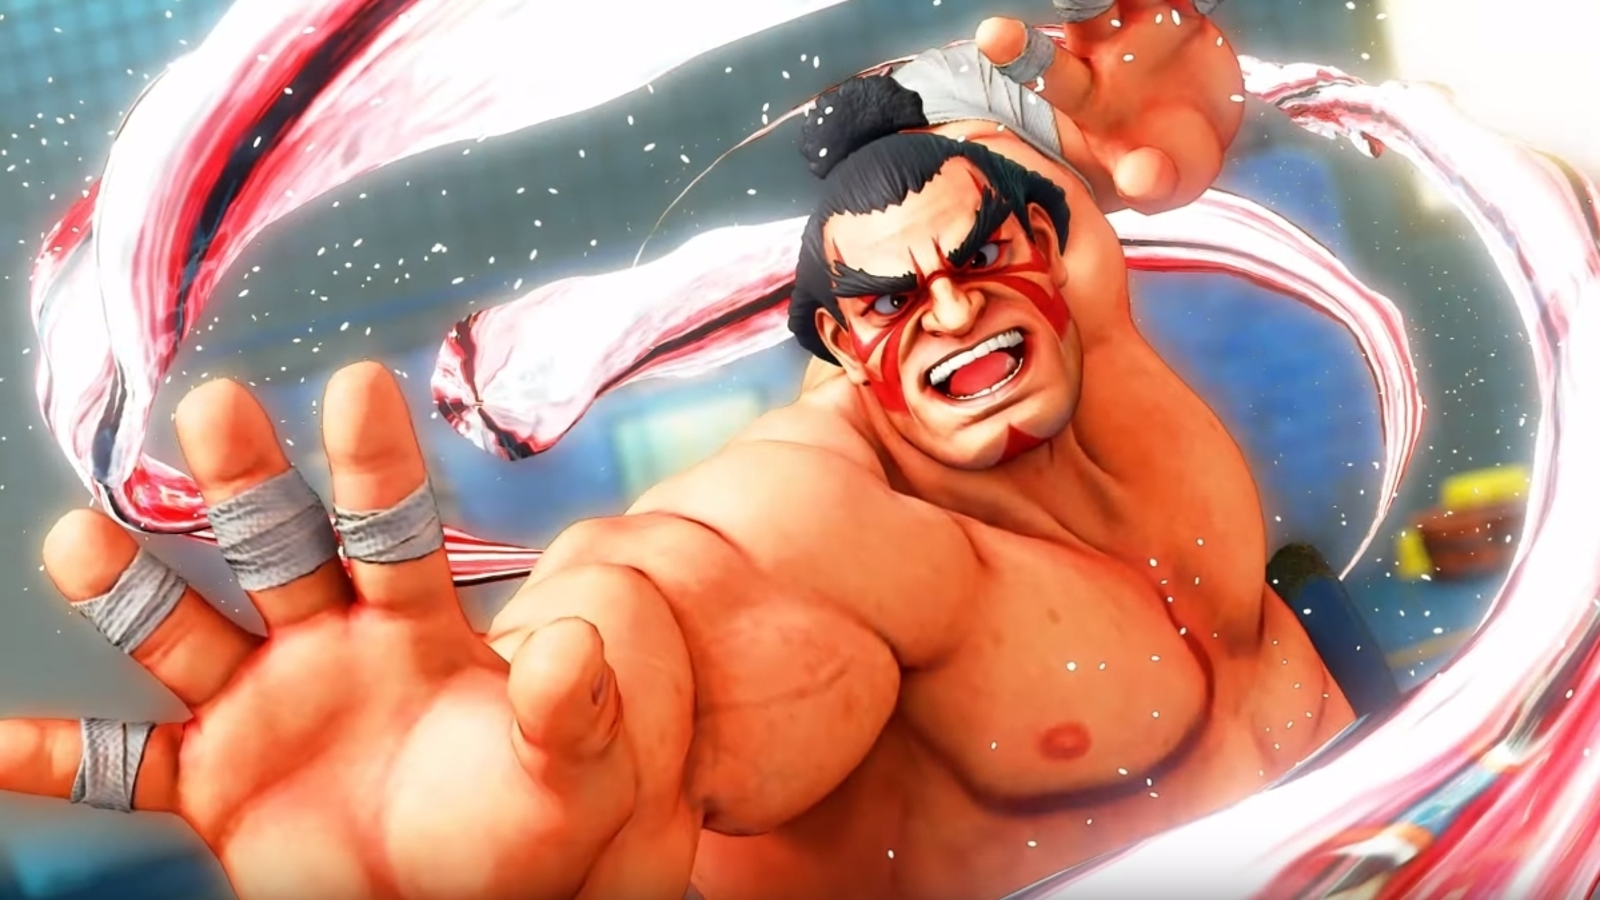 Street Fighter 6 is coming to Steam's biggest battle royale